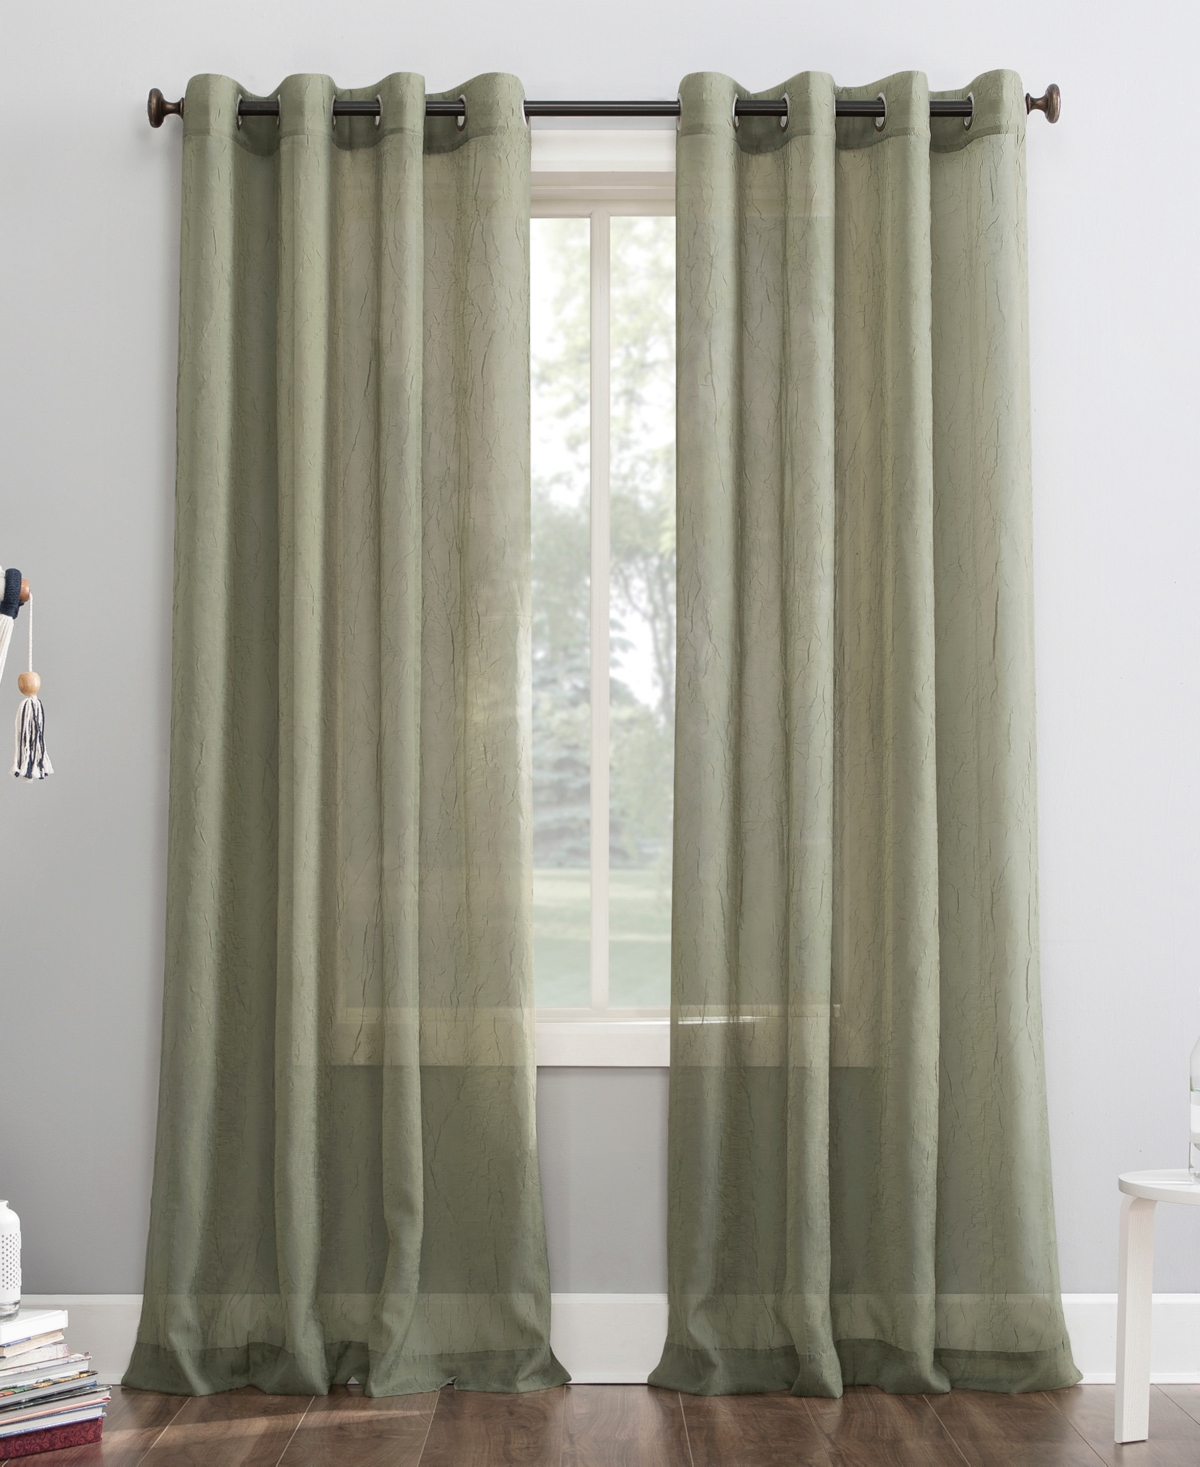 No. 918 Erica Crushed Voile Sheer Grommet Single Curtain Panel, 51" X 72" In Willow